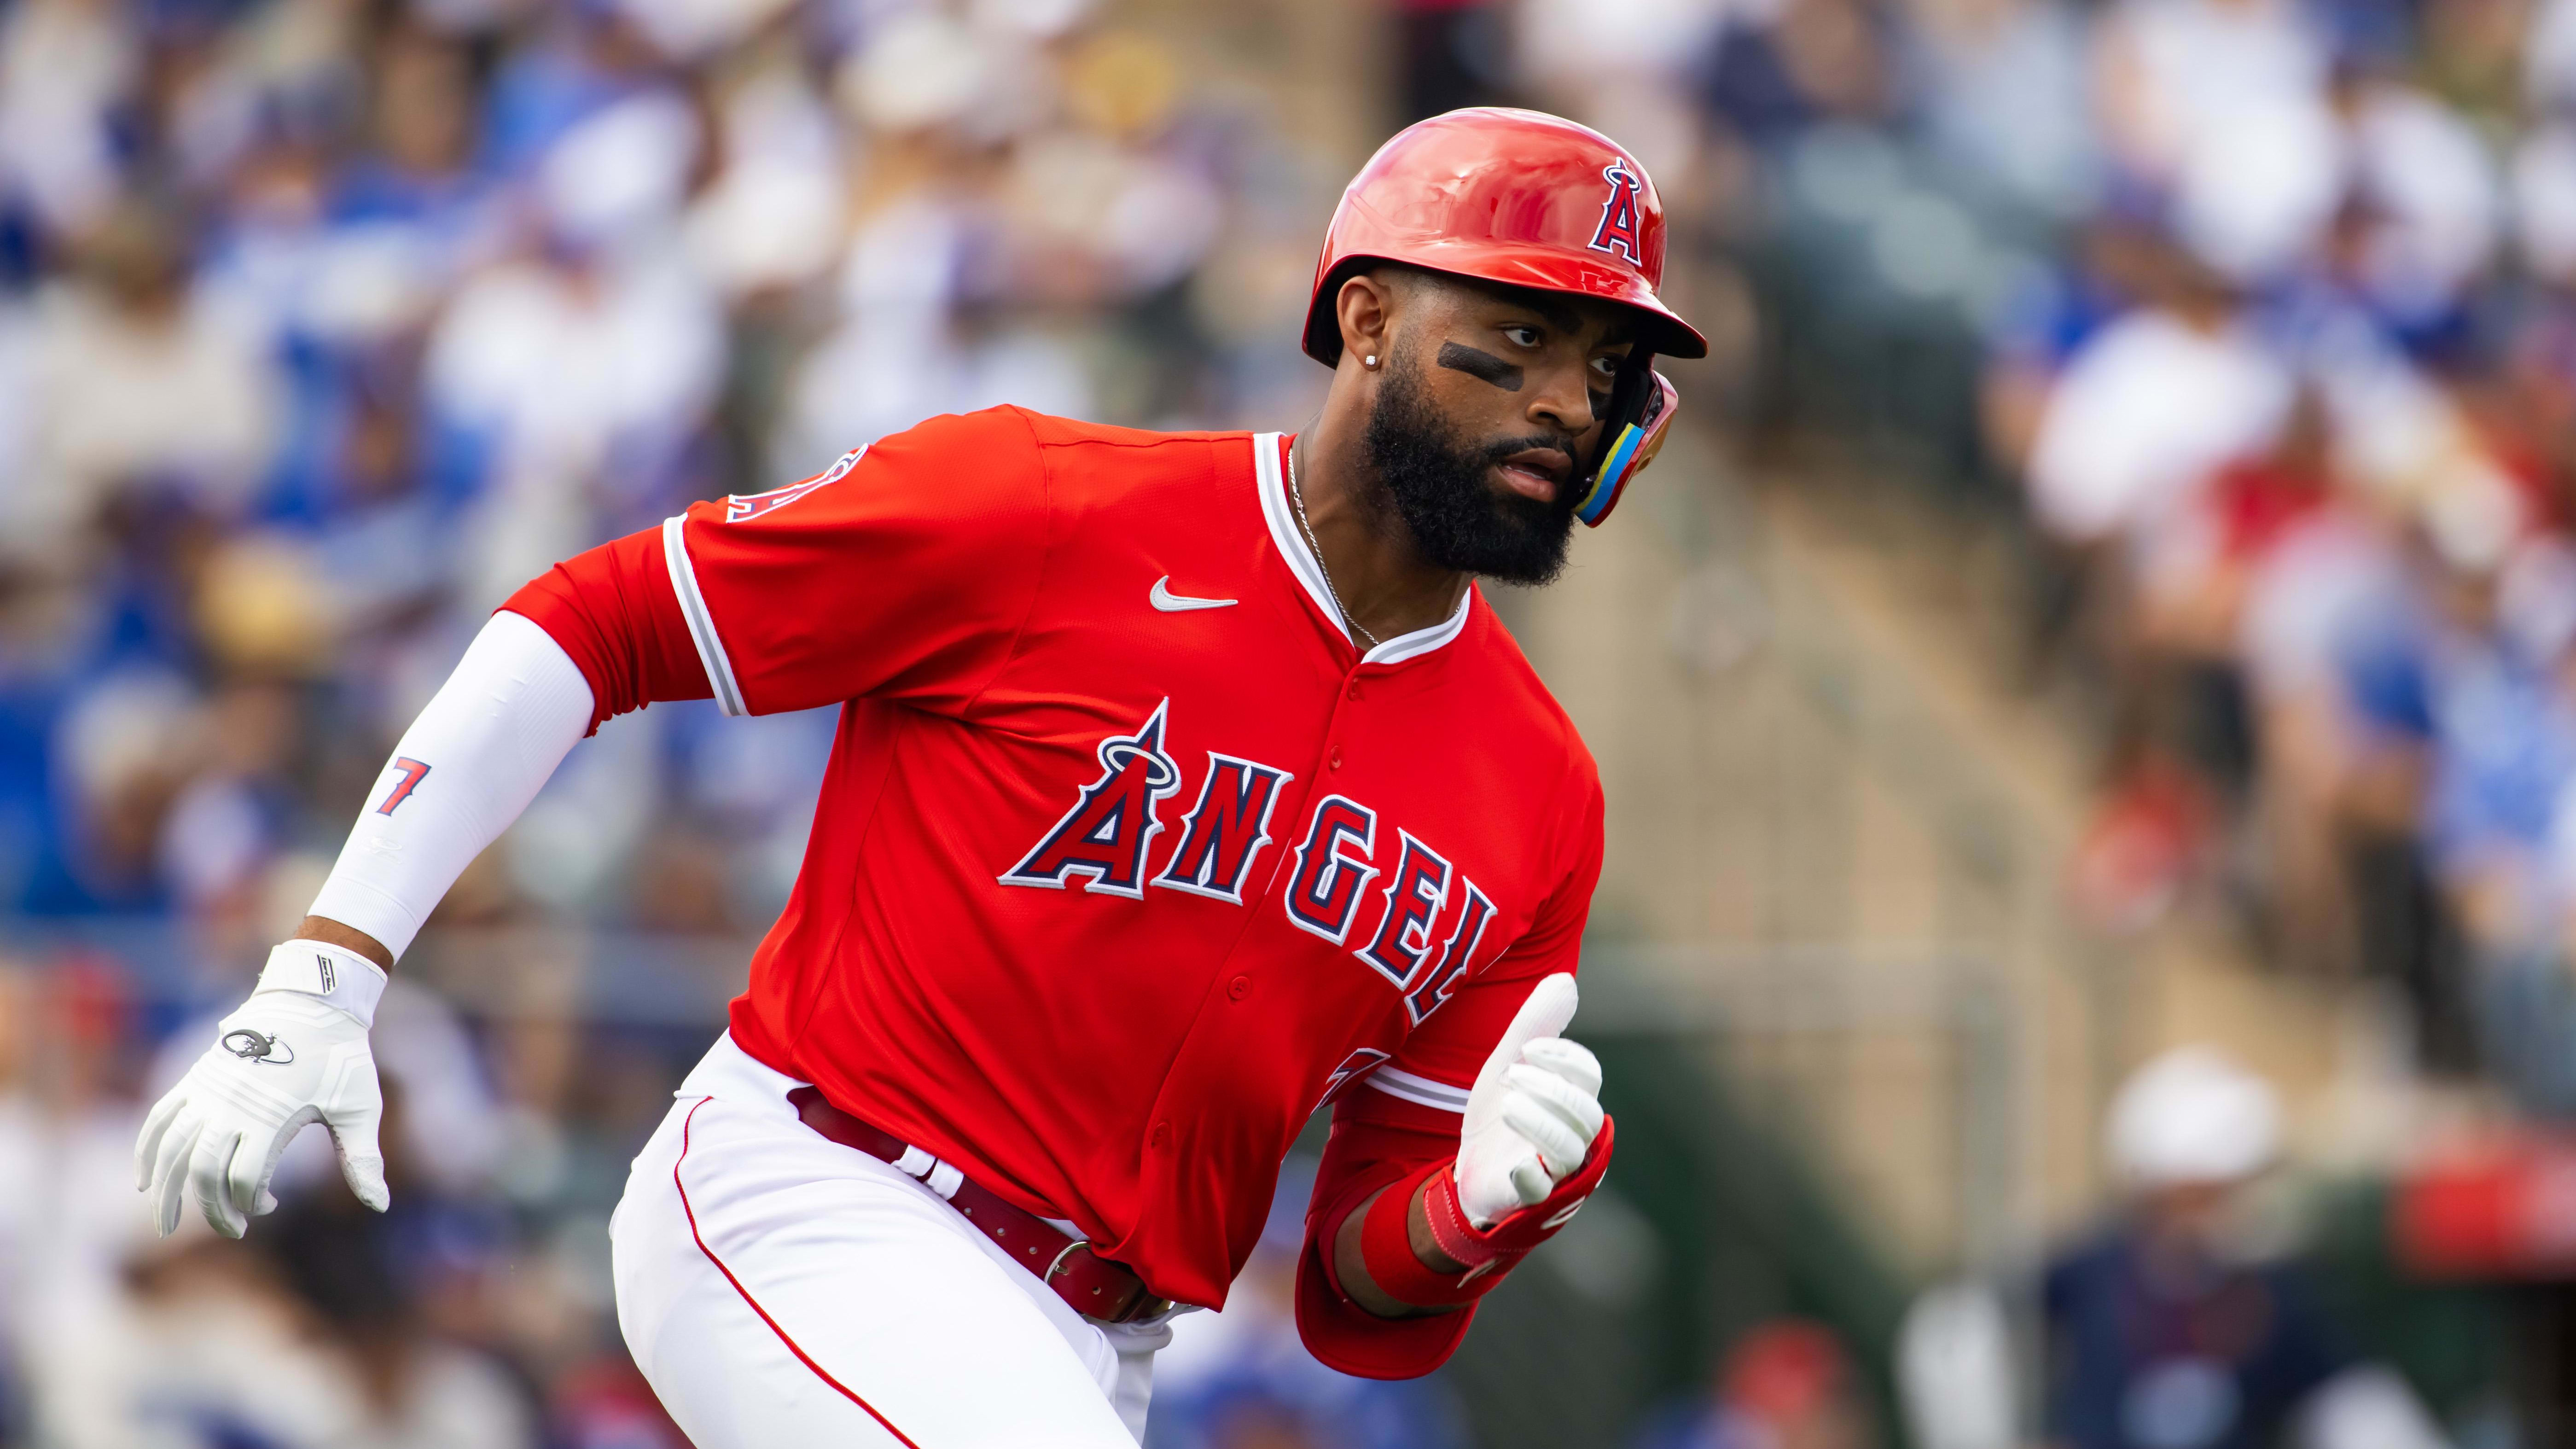 Ron Washington Unhappy With Jo Adell for ‘Embarrassing’ Base Running Blunder That Cost Angels